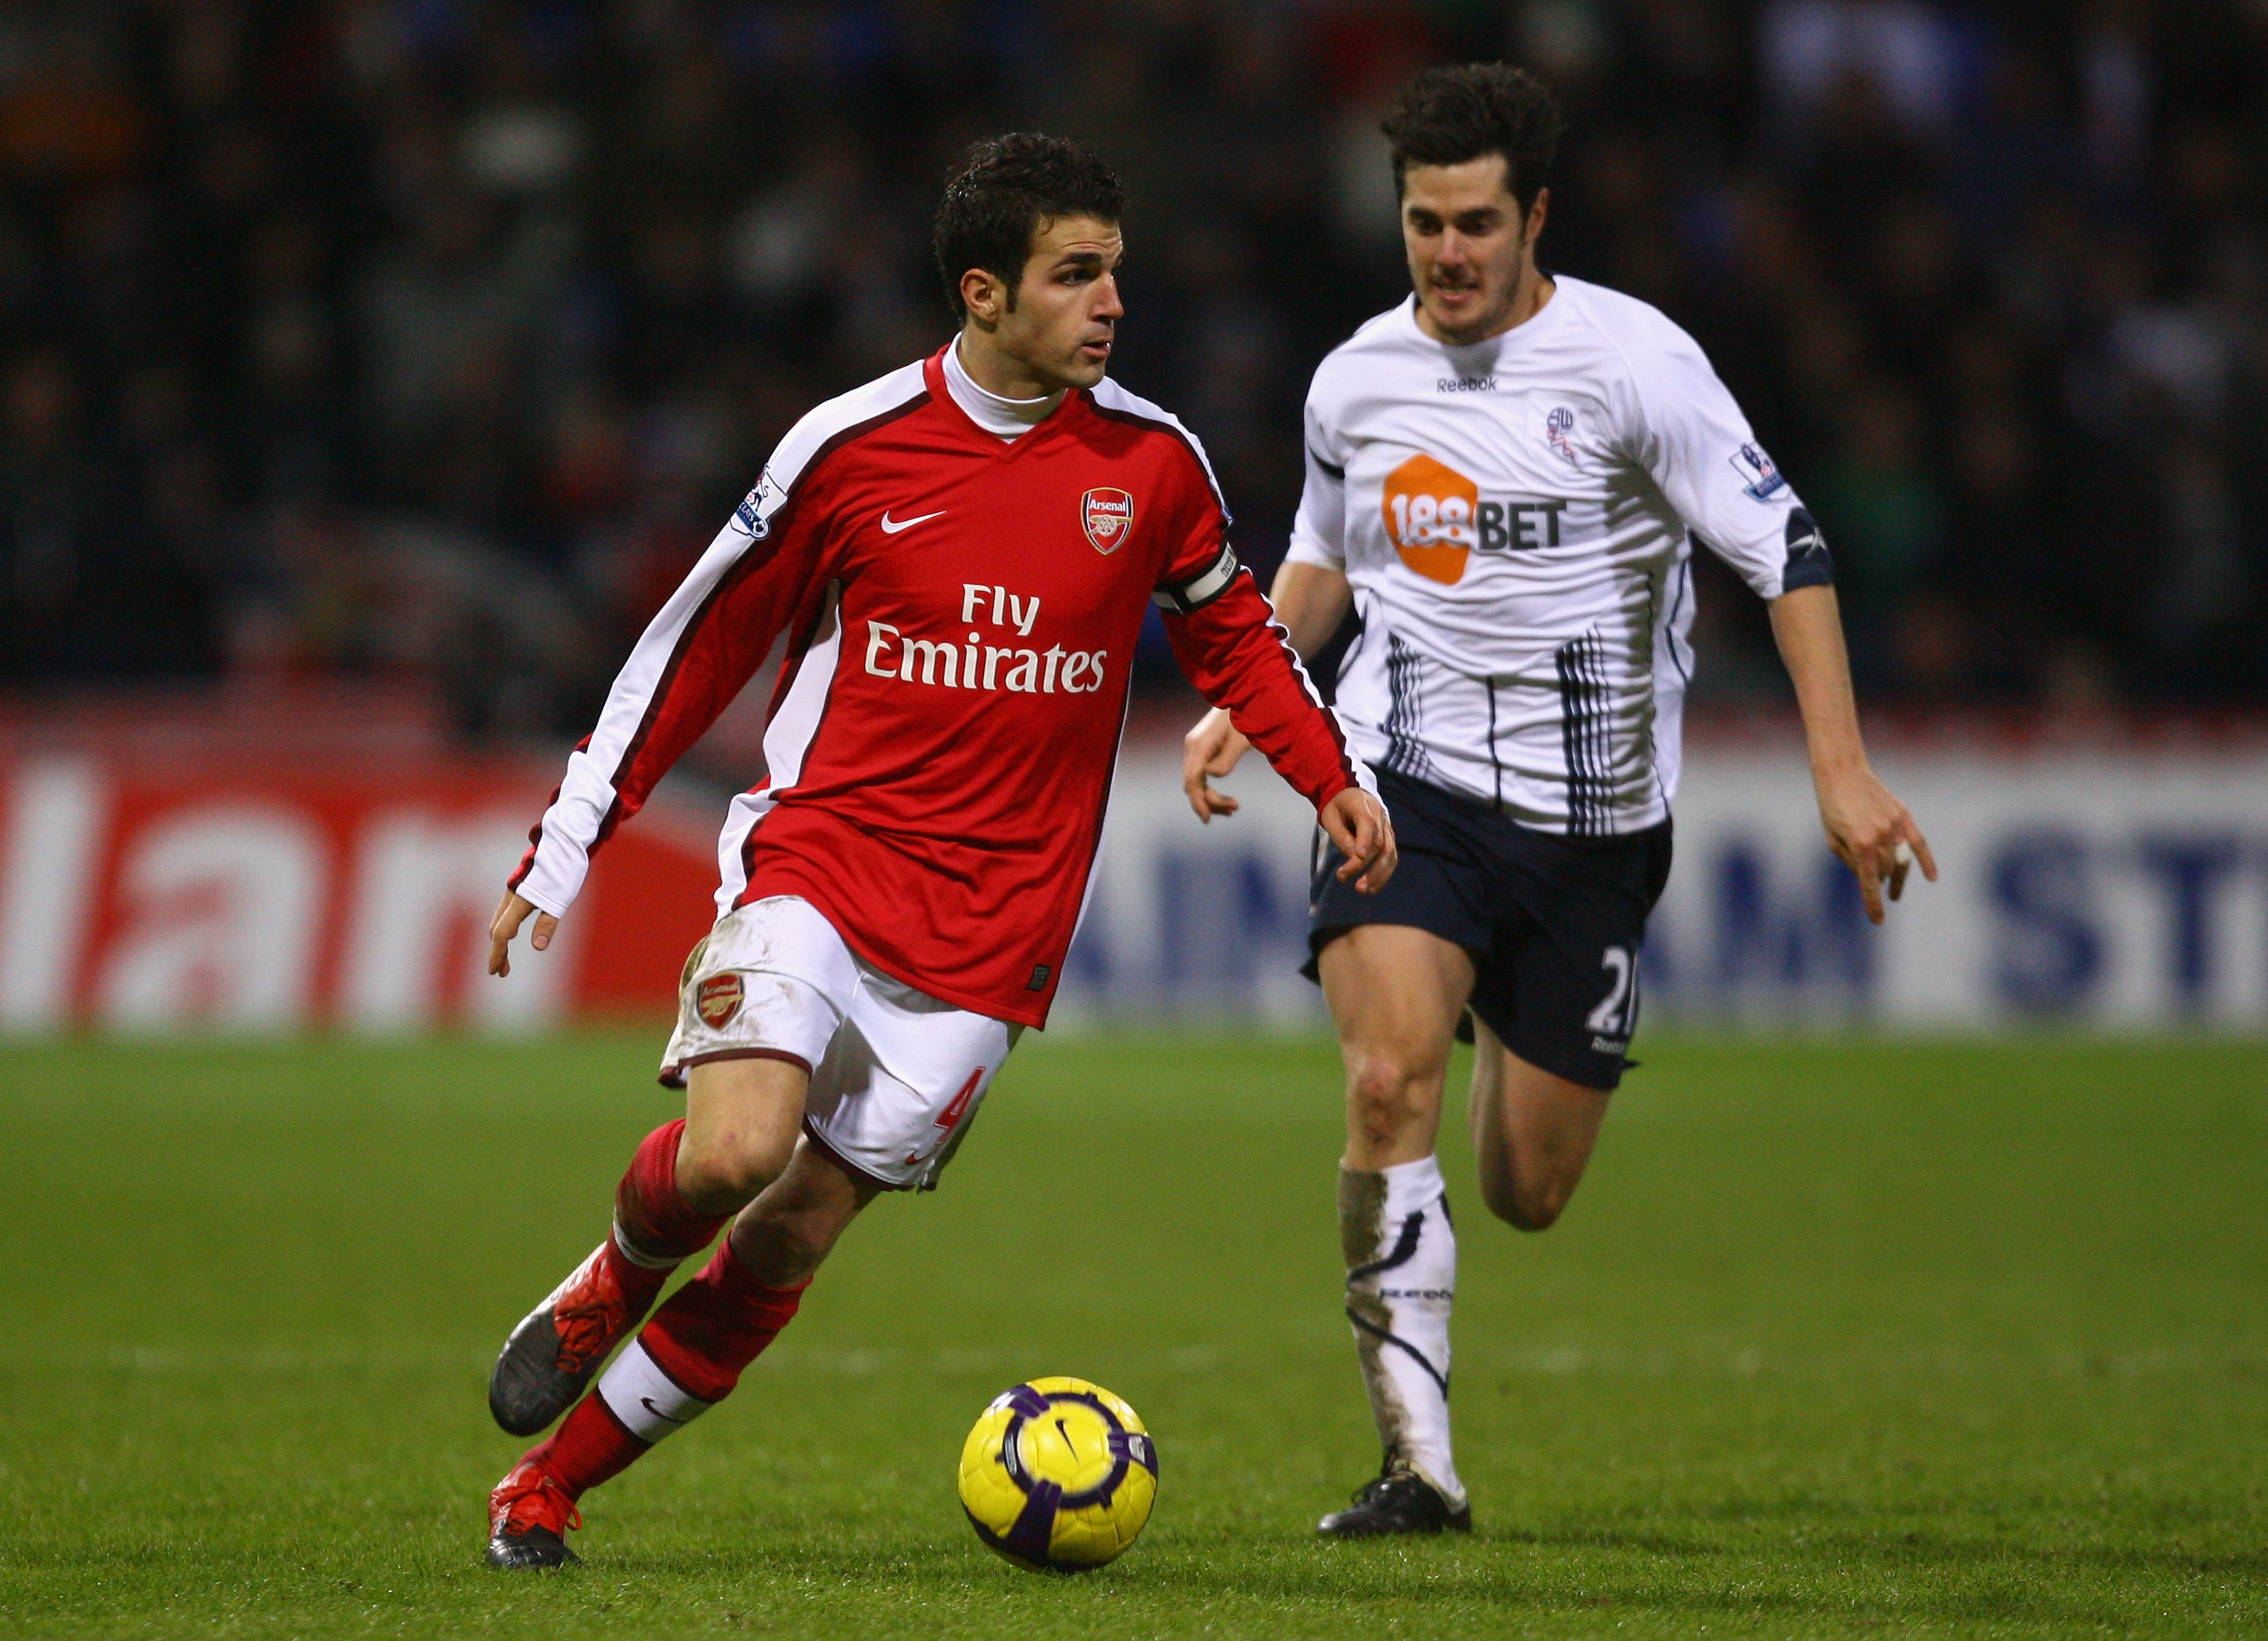 BOLTON, ENGLAND - JANUARY 17:  Cesc Fabregas of Arsenal competes with Tamir Cohen of Bolton Wanderers during the Barclays Premier League match between Bolton Wanderers and Arsenal at the Reebok Stadium on January 17, 2010 in Bolton, England.  (Photo by Al